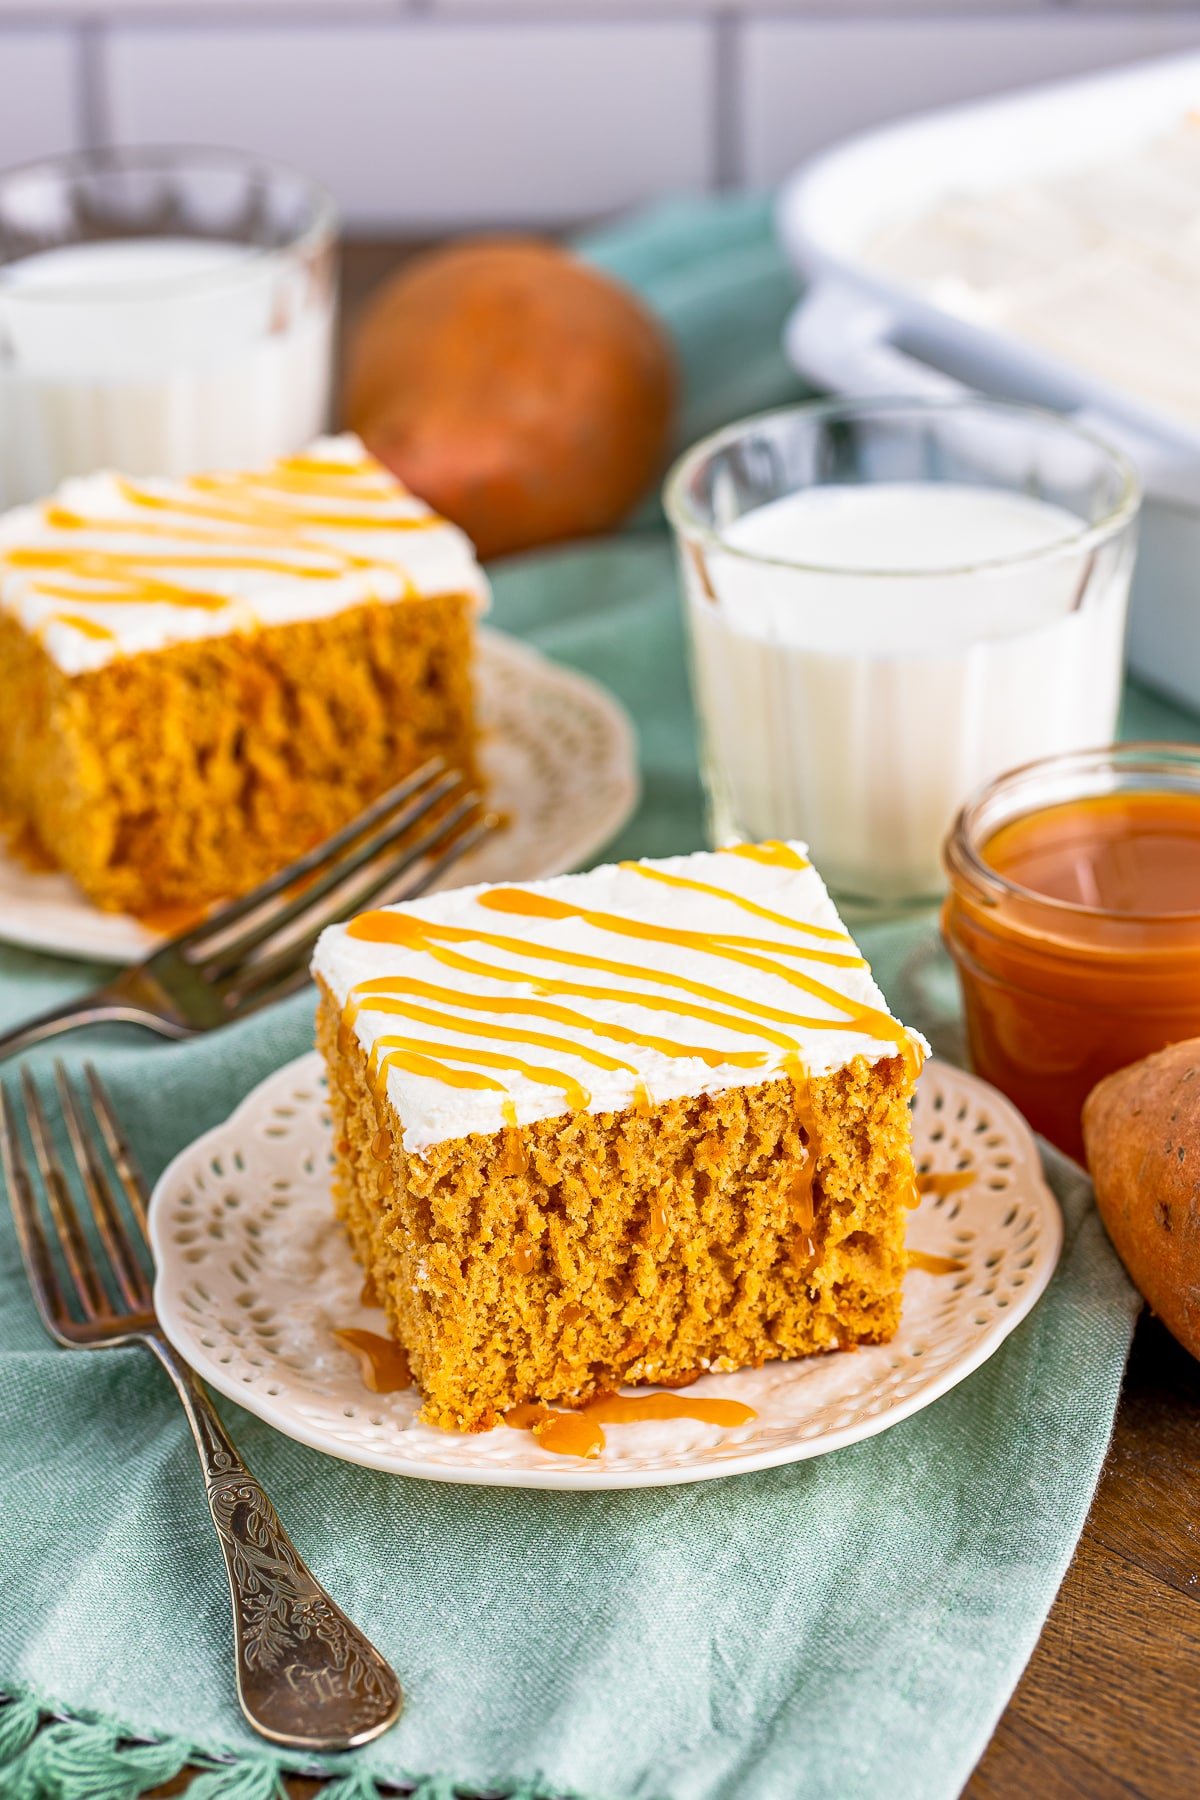 Top slices of Sweet Potato Cake on plates with caramel sauce and milk in background.